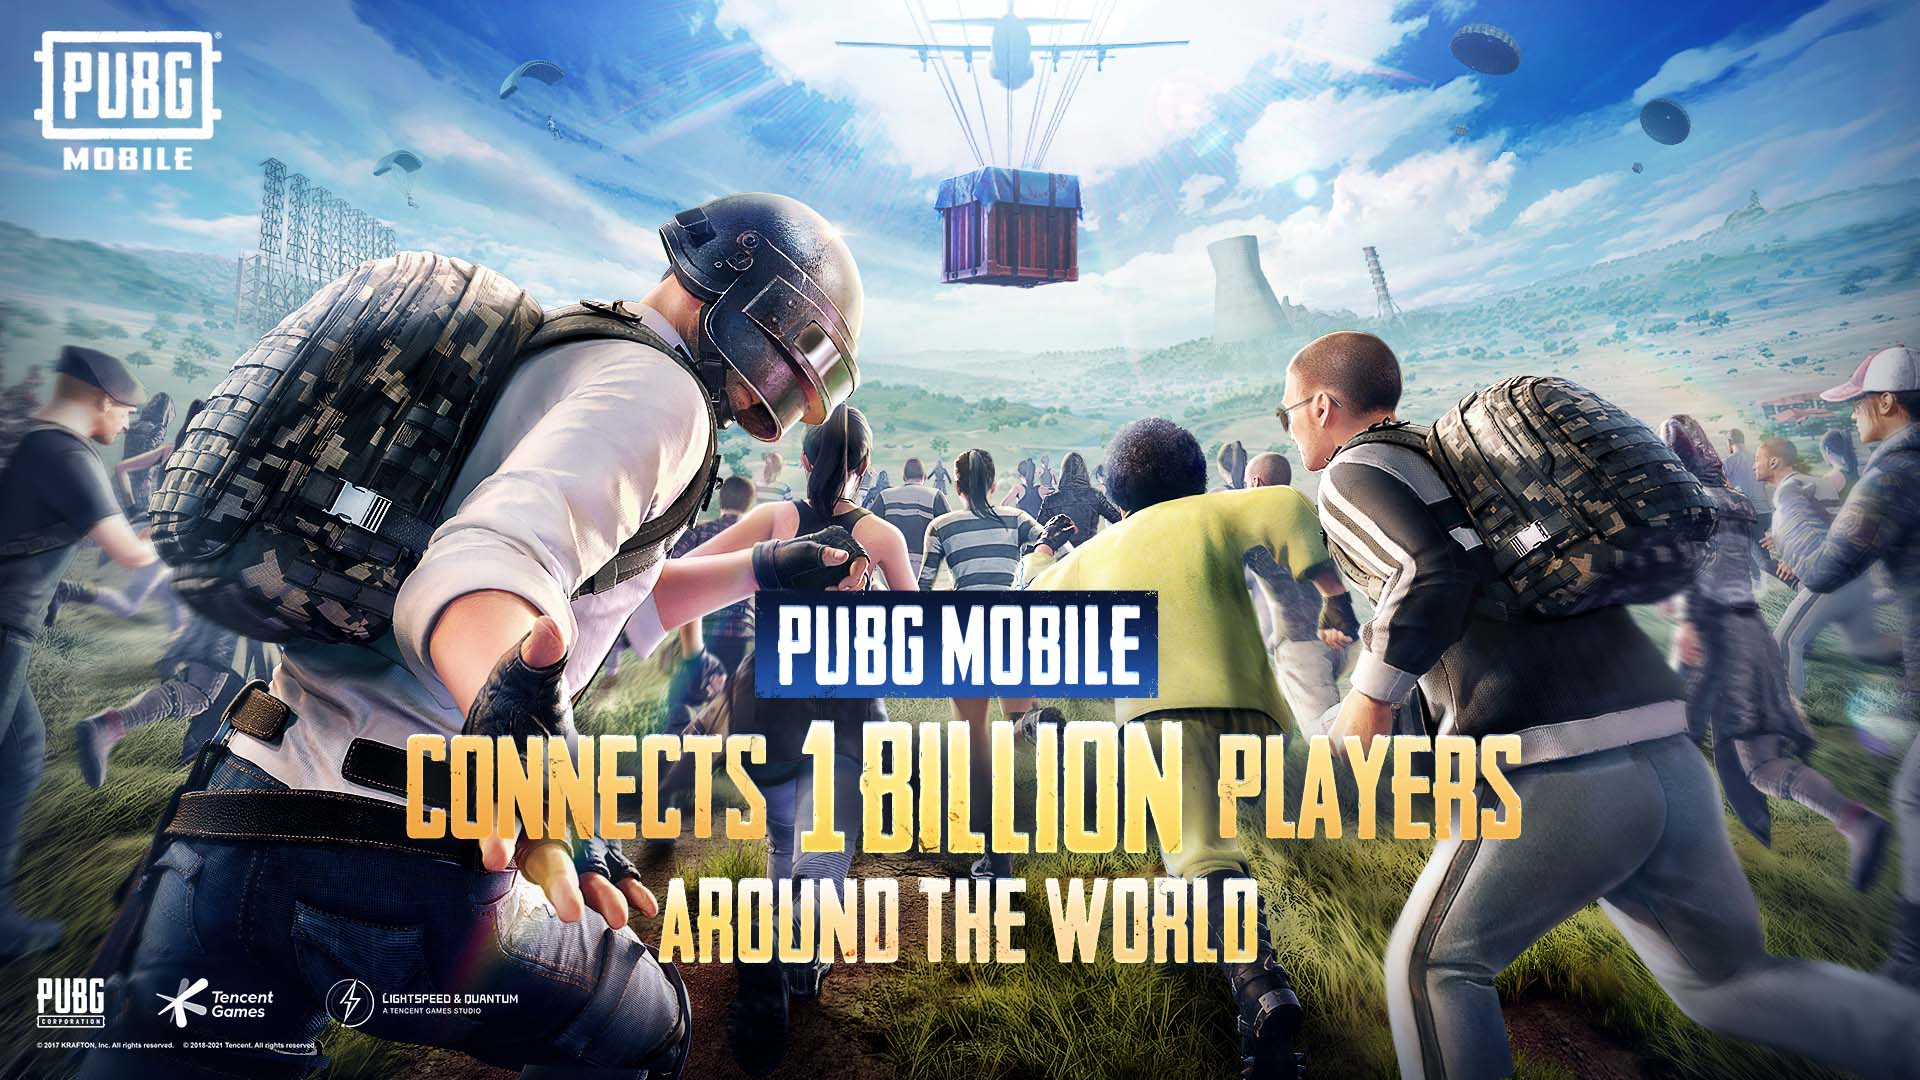 cach-nhan-uc-mien-phi-trong-pubg-mobile